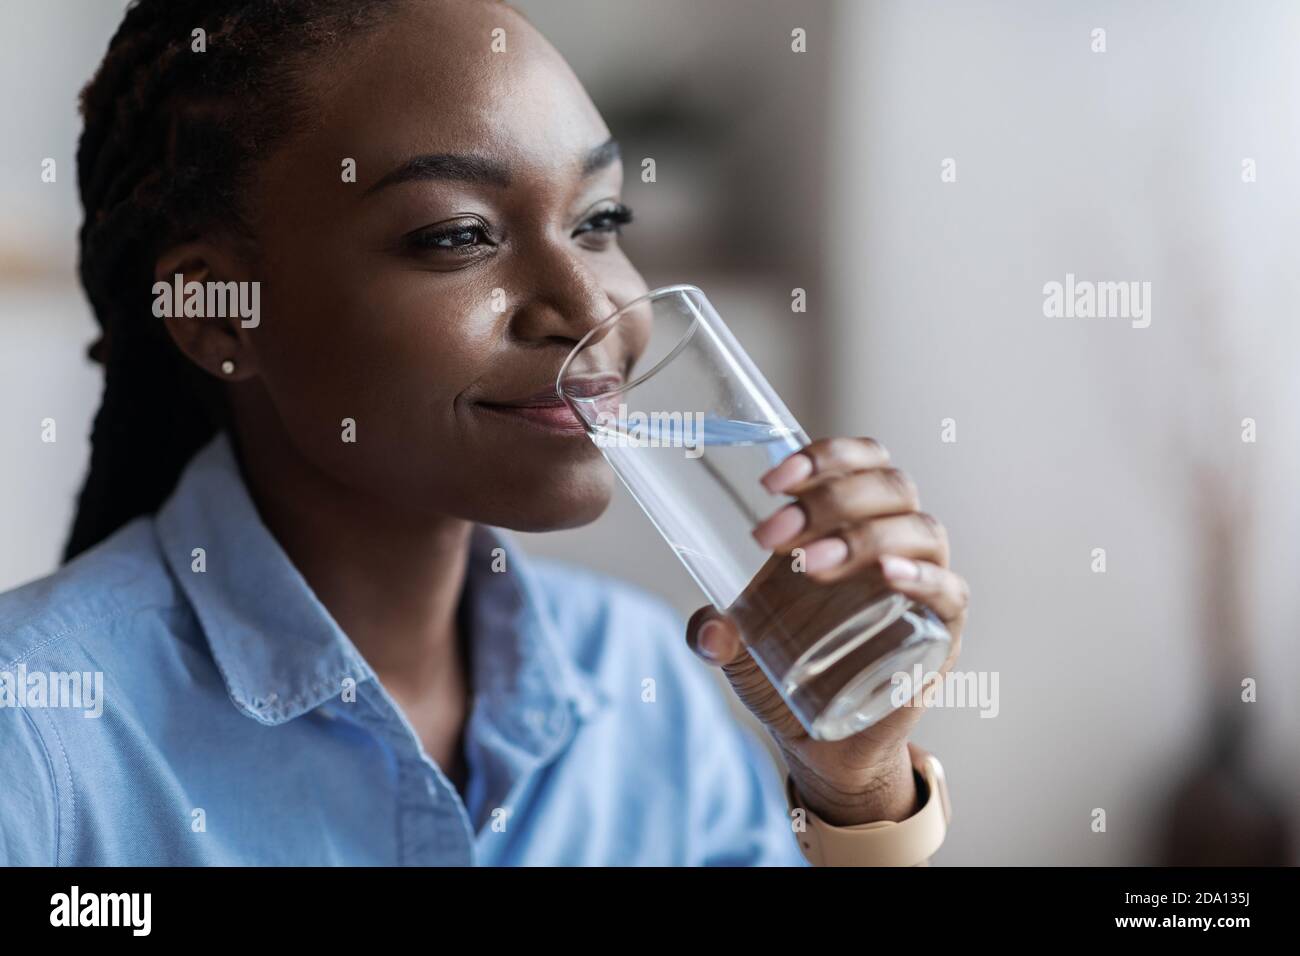 african woman drinking water